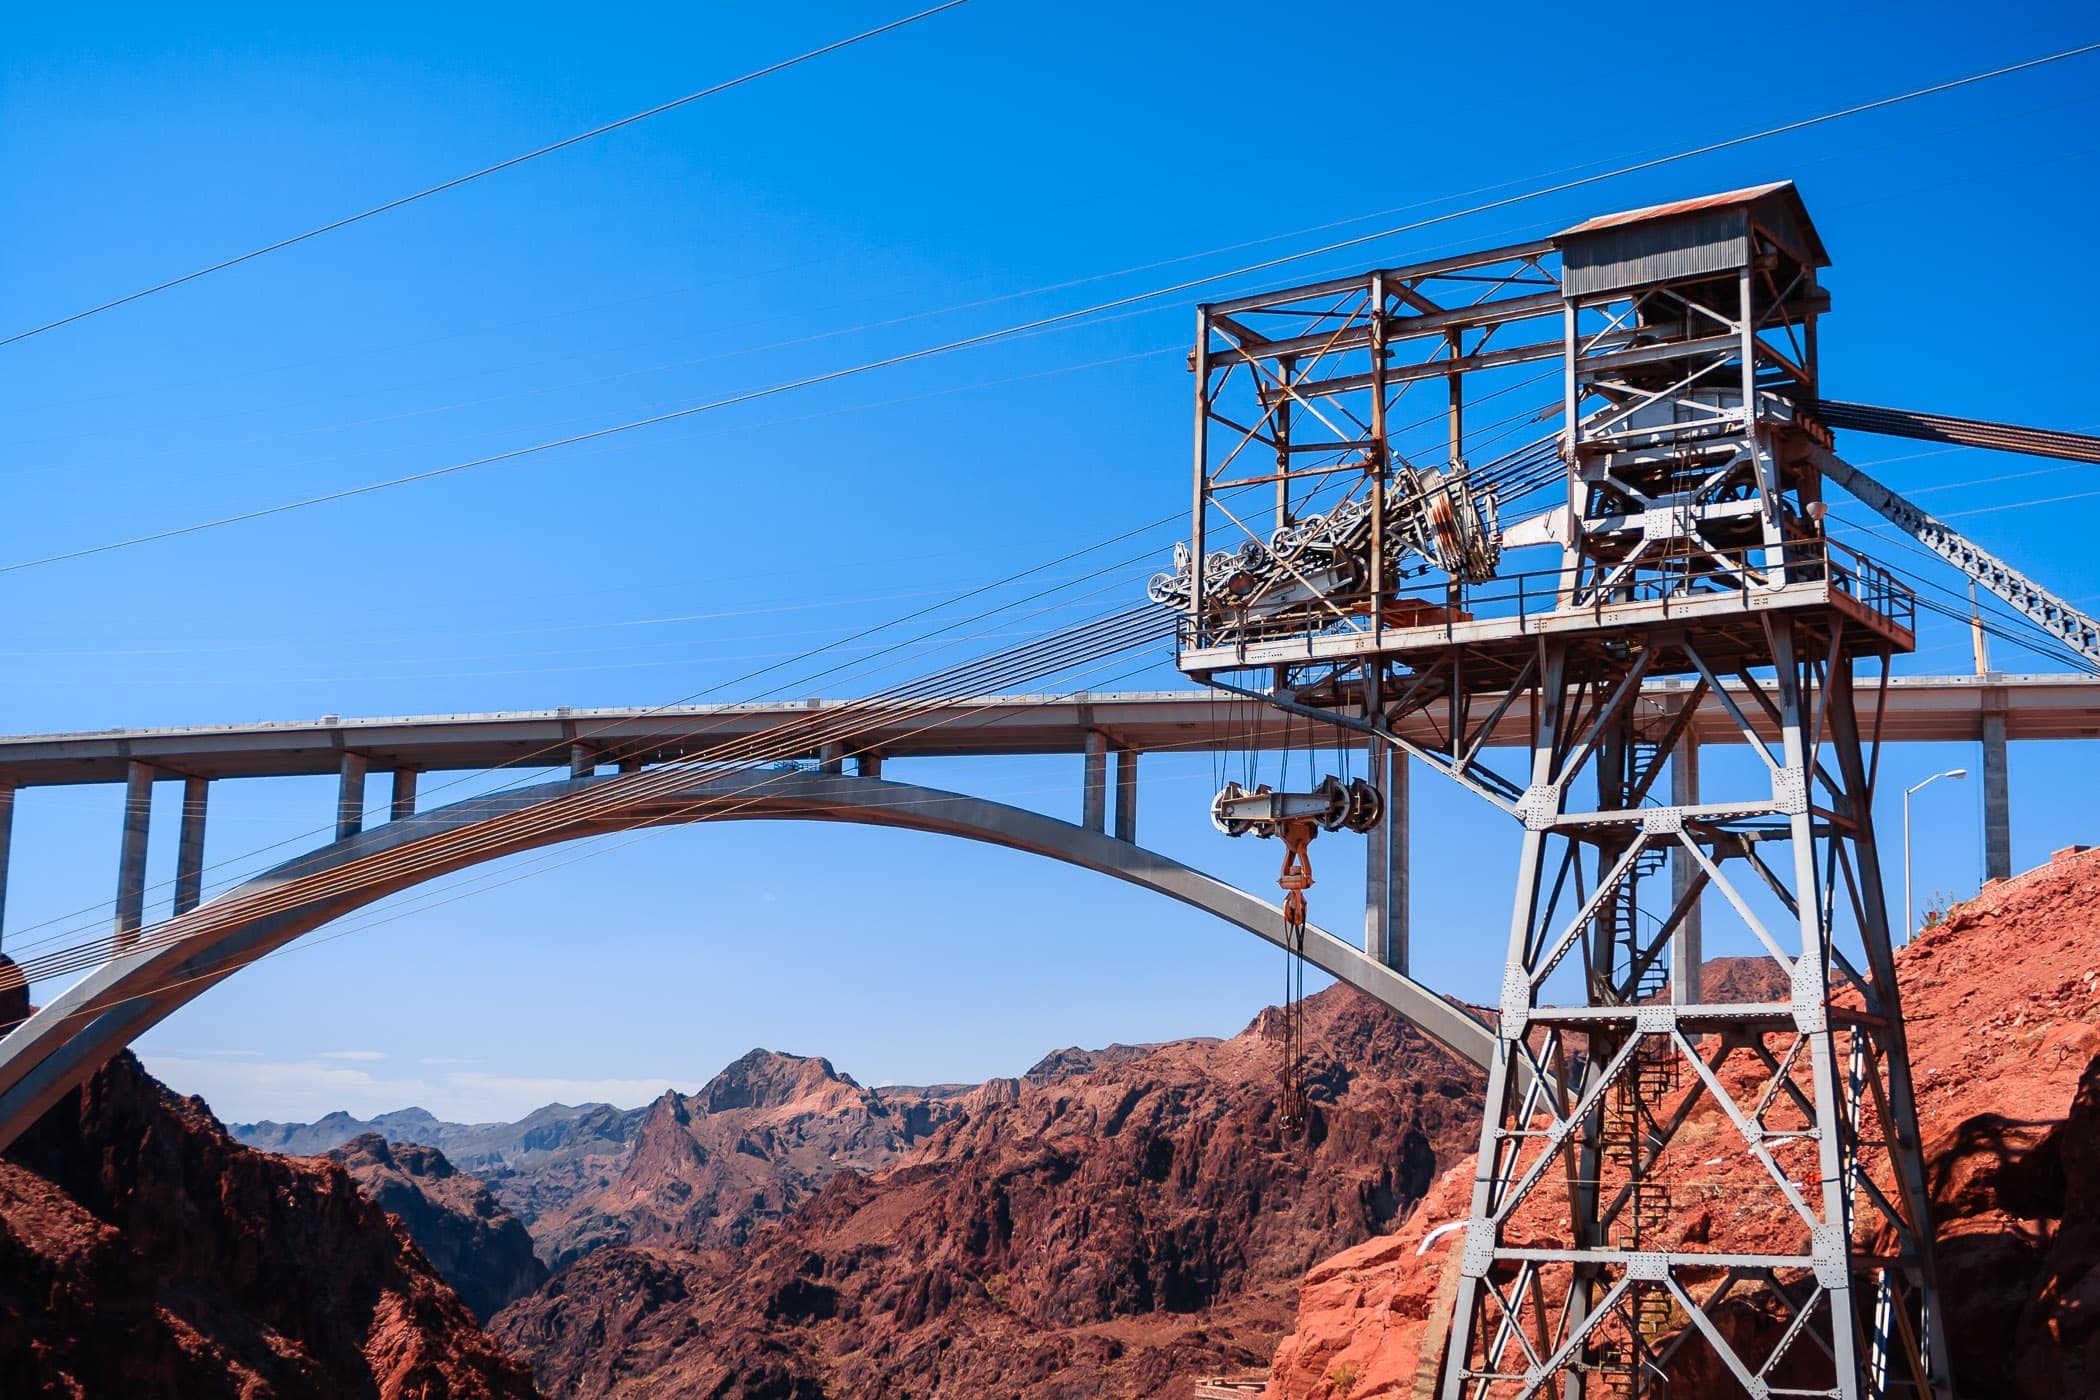 The almost-completed Pat Tillman Memorial Bridge over the Colorado River along the Nevada-Arizona border. This bridge lies just downstream from Hoover Dam and, since opening this fall, acts as a bypass for traffic that was originally directed across the dam.